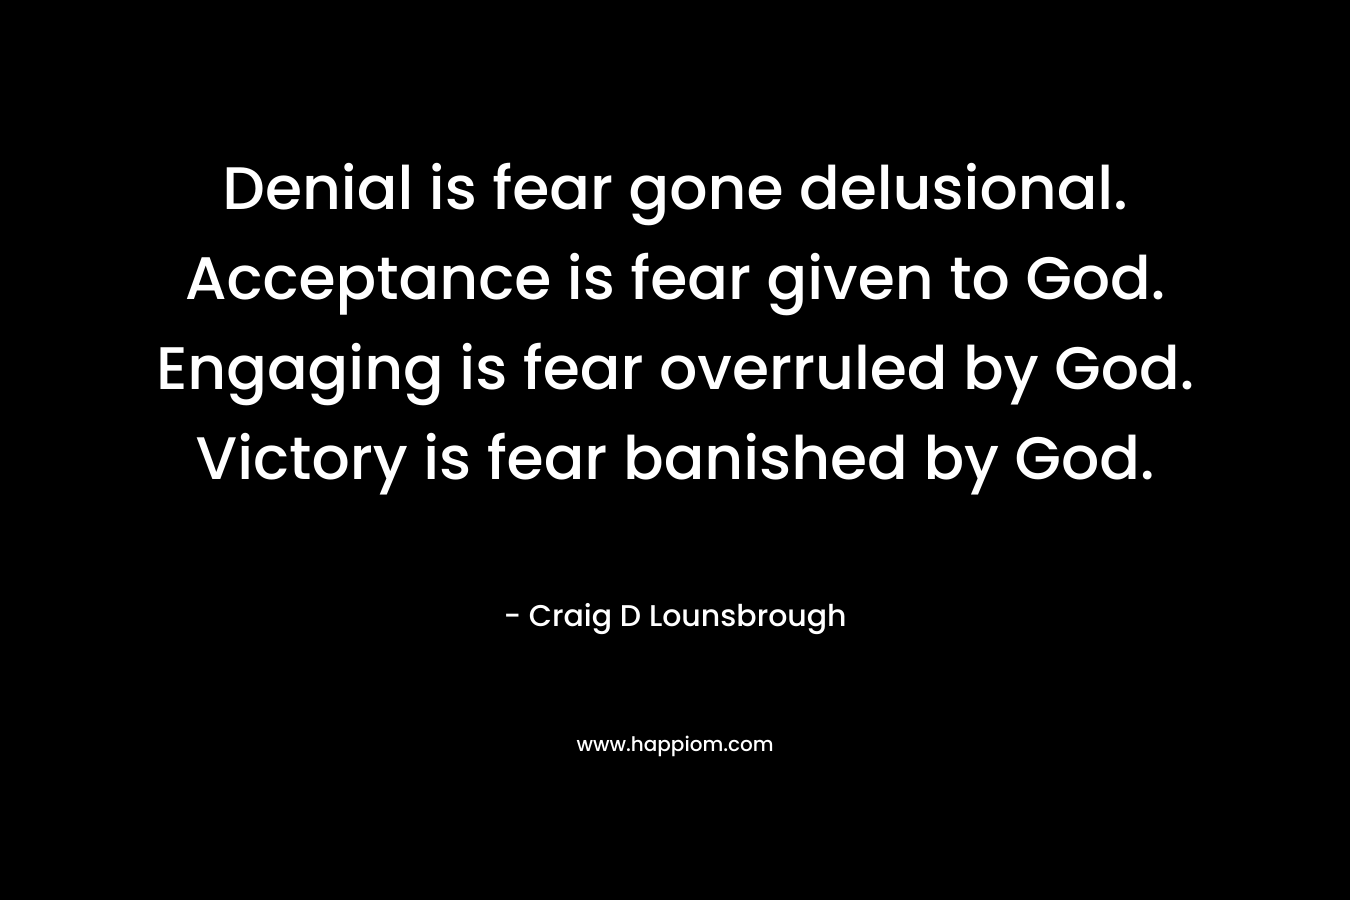 Denial is fear gone delusional. Acceptance is fear given to God. Engaging is fear overruled by God. Victory is fear banished by God. – Craig D Lounsbrough